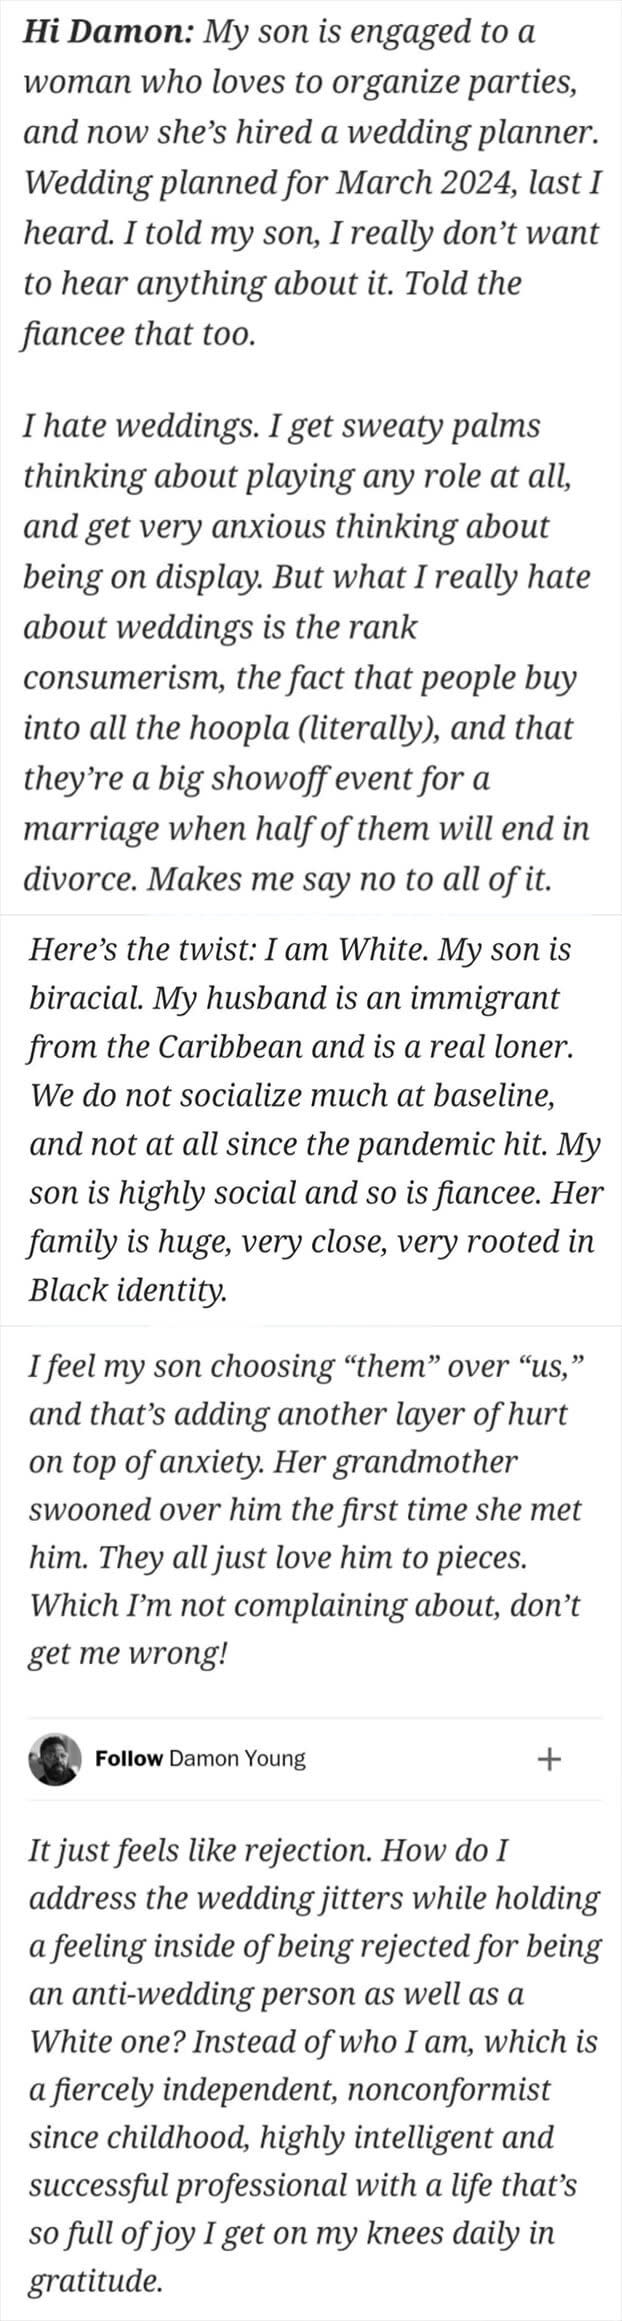 The mother of the groom says they hate weddings and feel that her son having a wedding with a Black woman is him choosing "them" over "us," with them and us in quotes